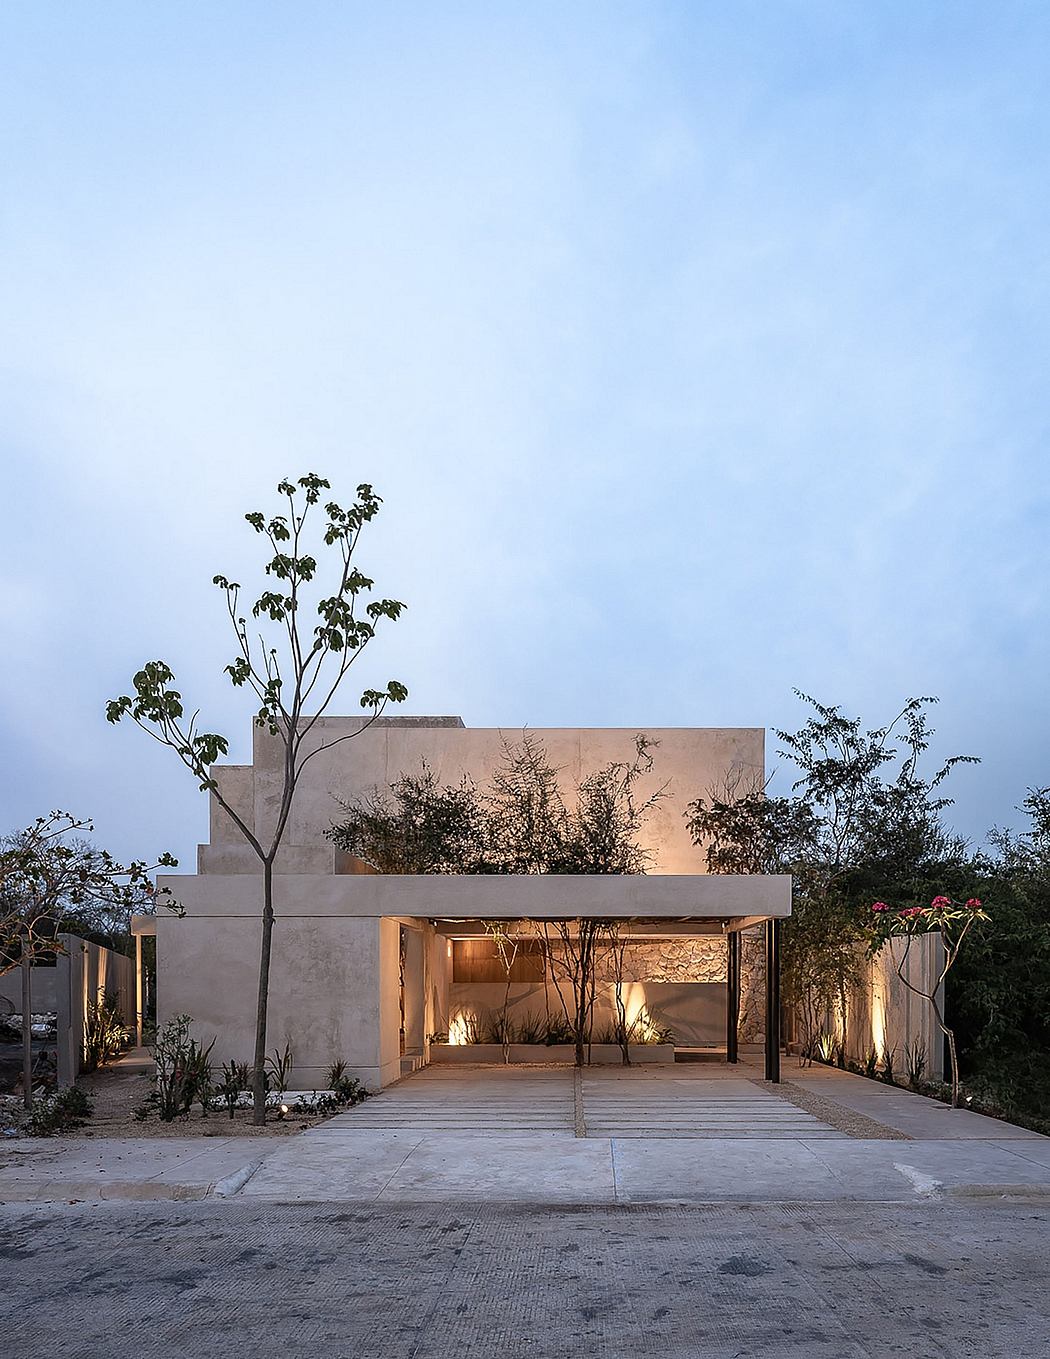 A modern, minimalist building with a warm, inviting exterior featuring trees and lighting.